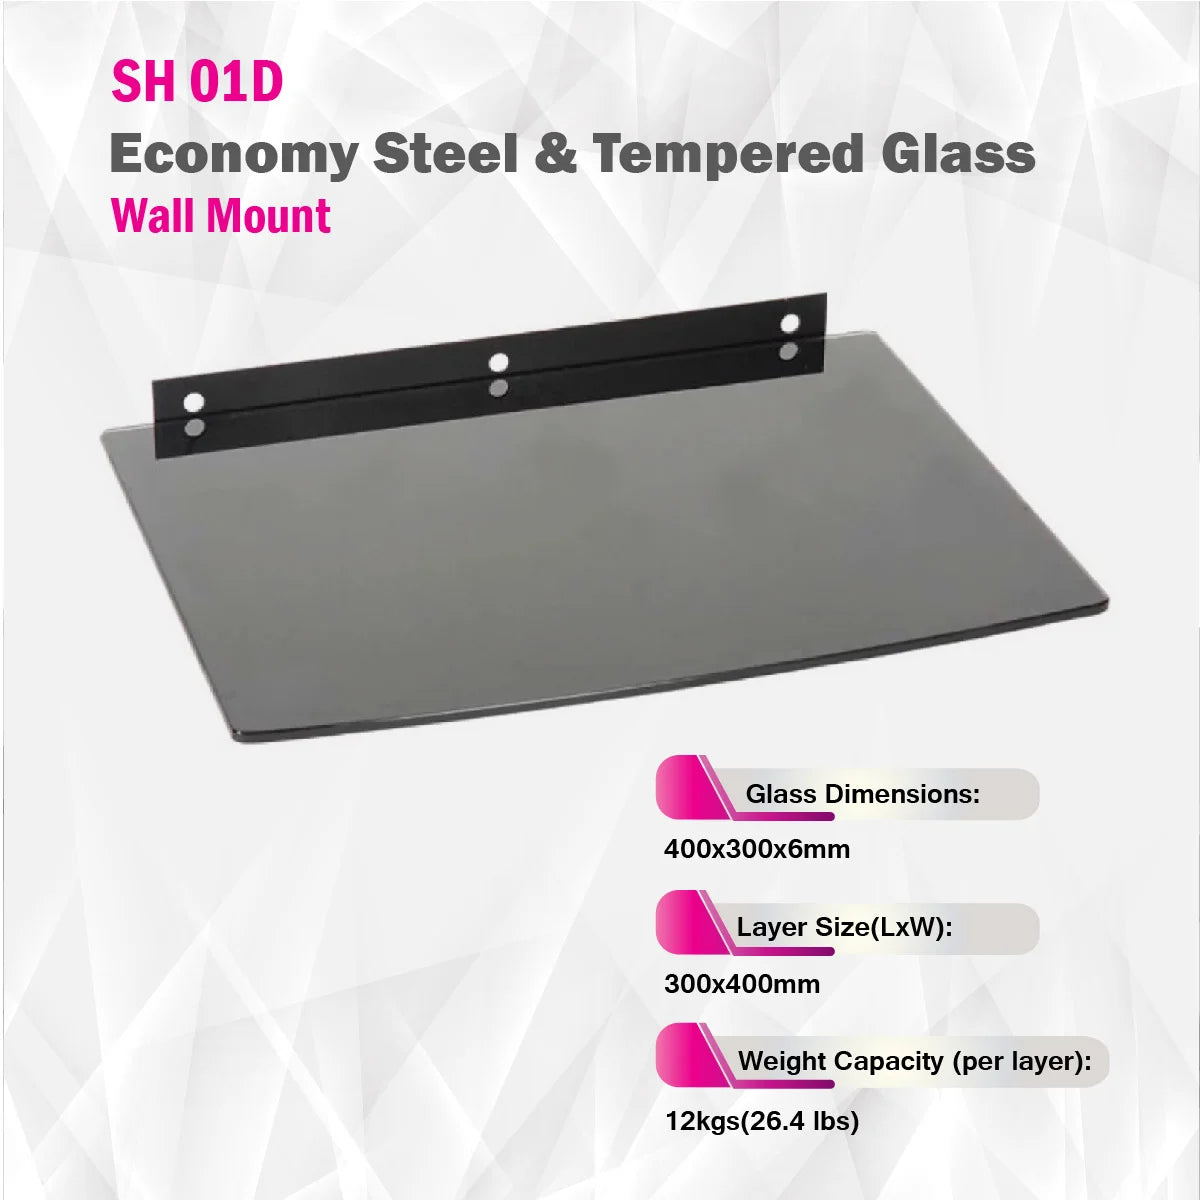 Skill Tech SH 01D - Economy Steel & Tempered Glass Wall Mount